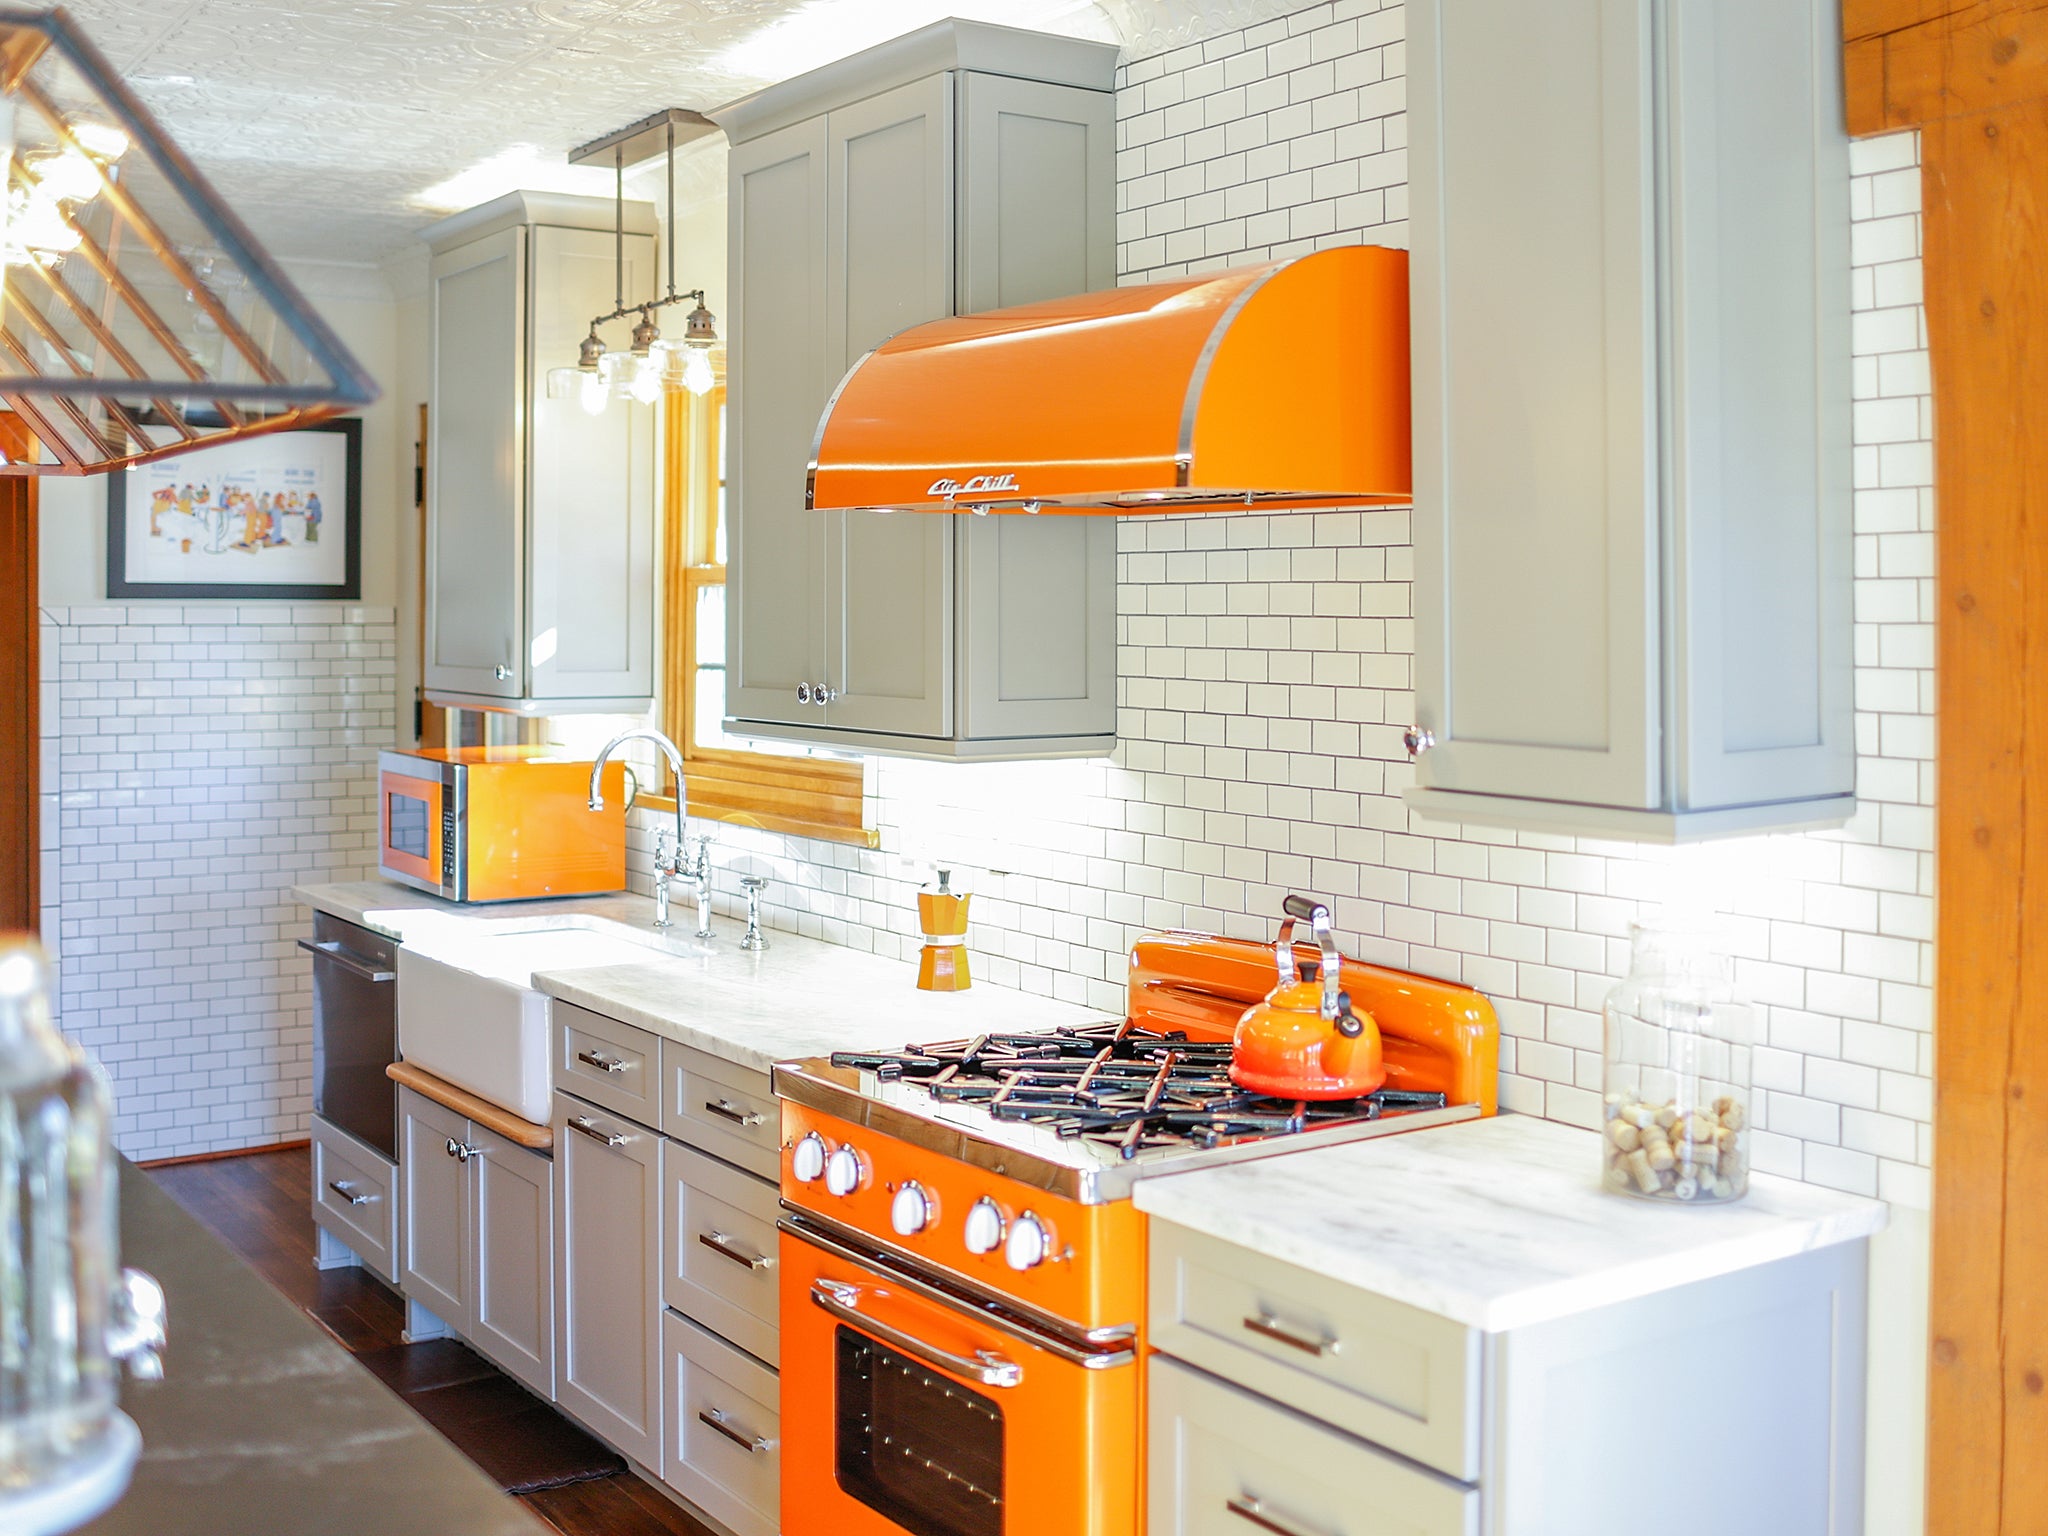 Pops of colour take the kitchen from clinical to fun